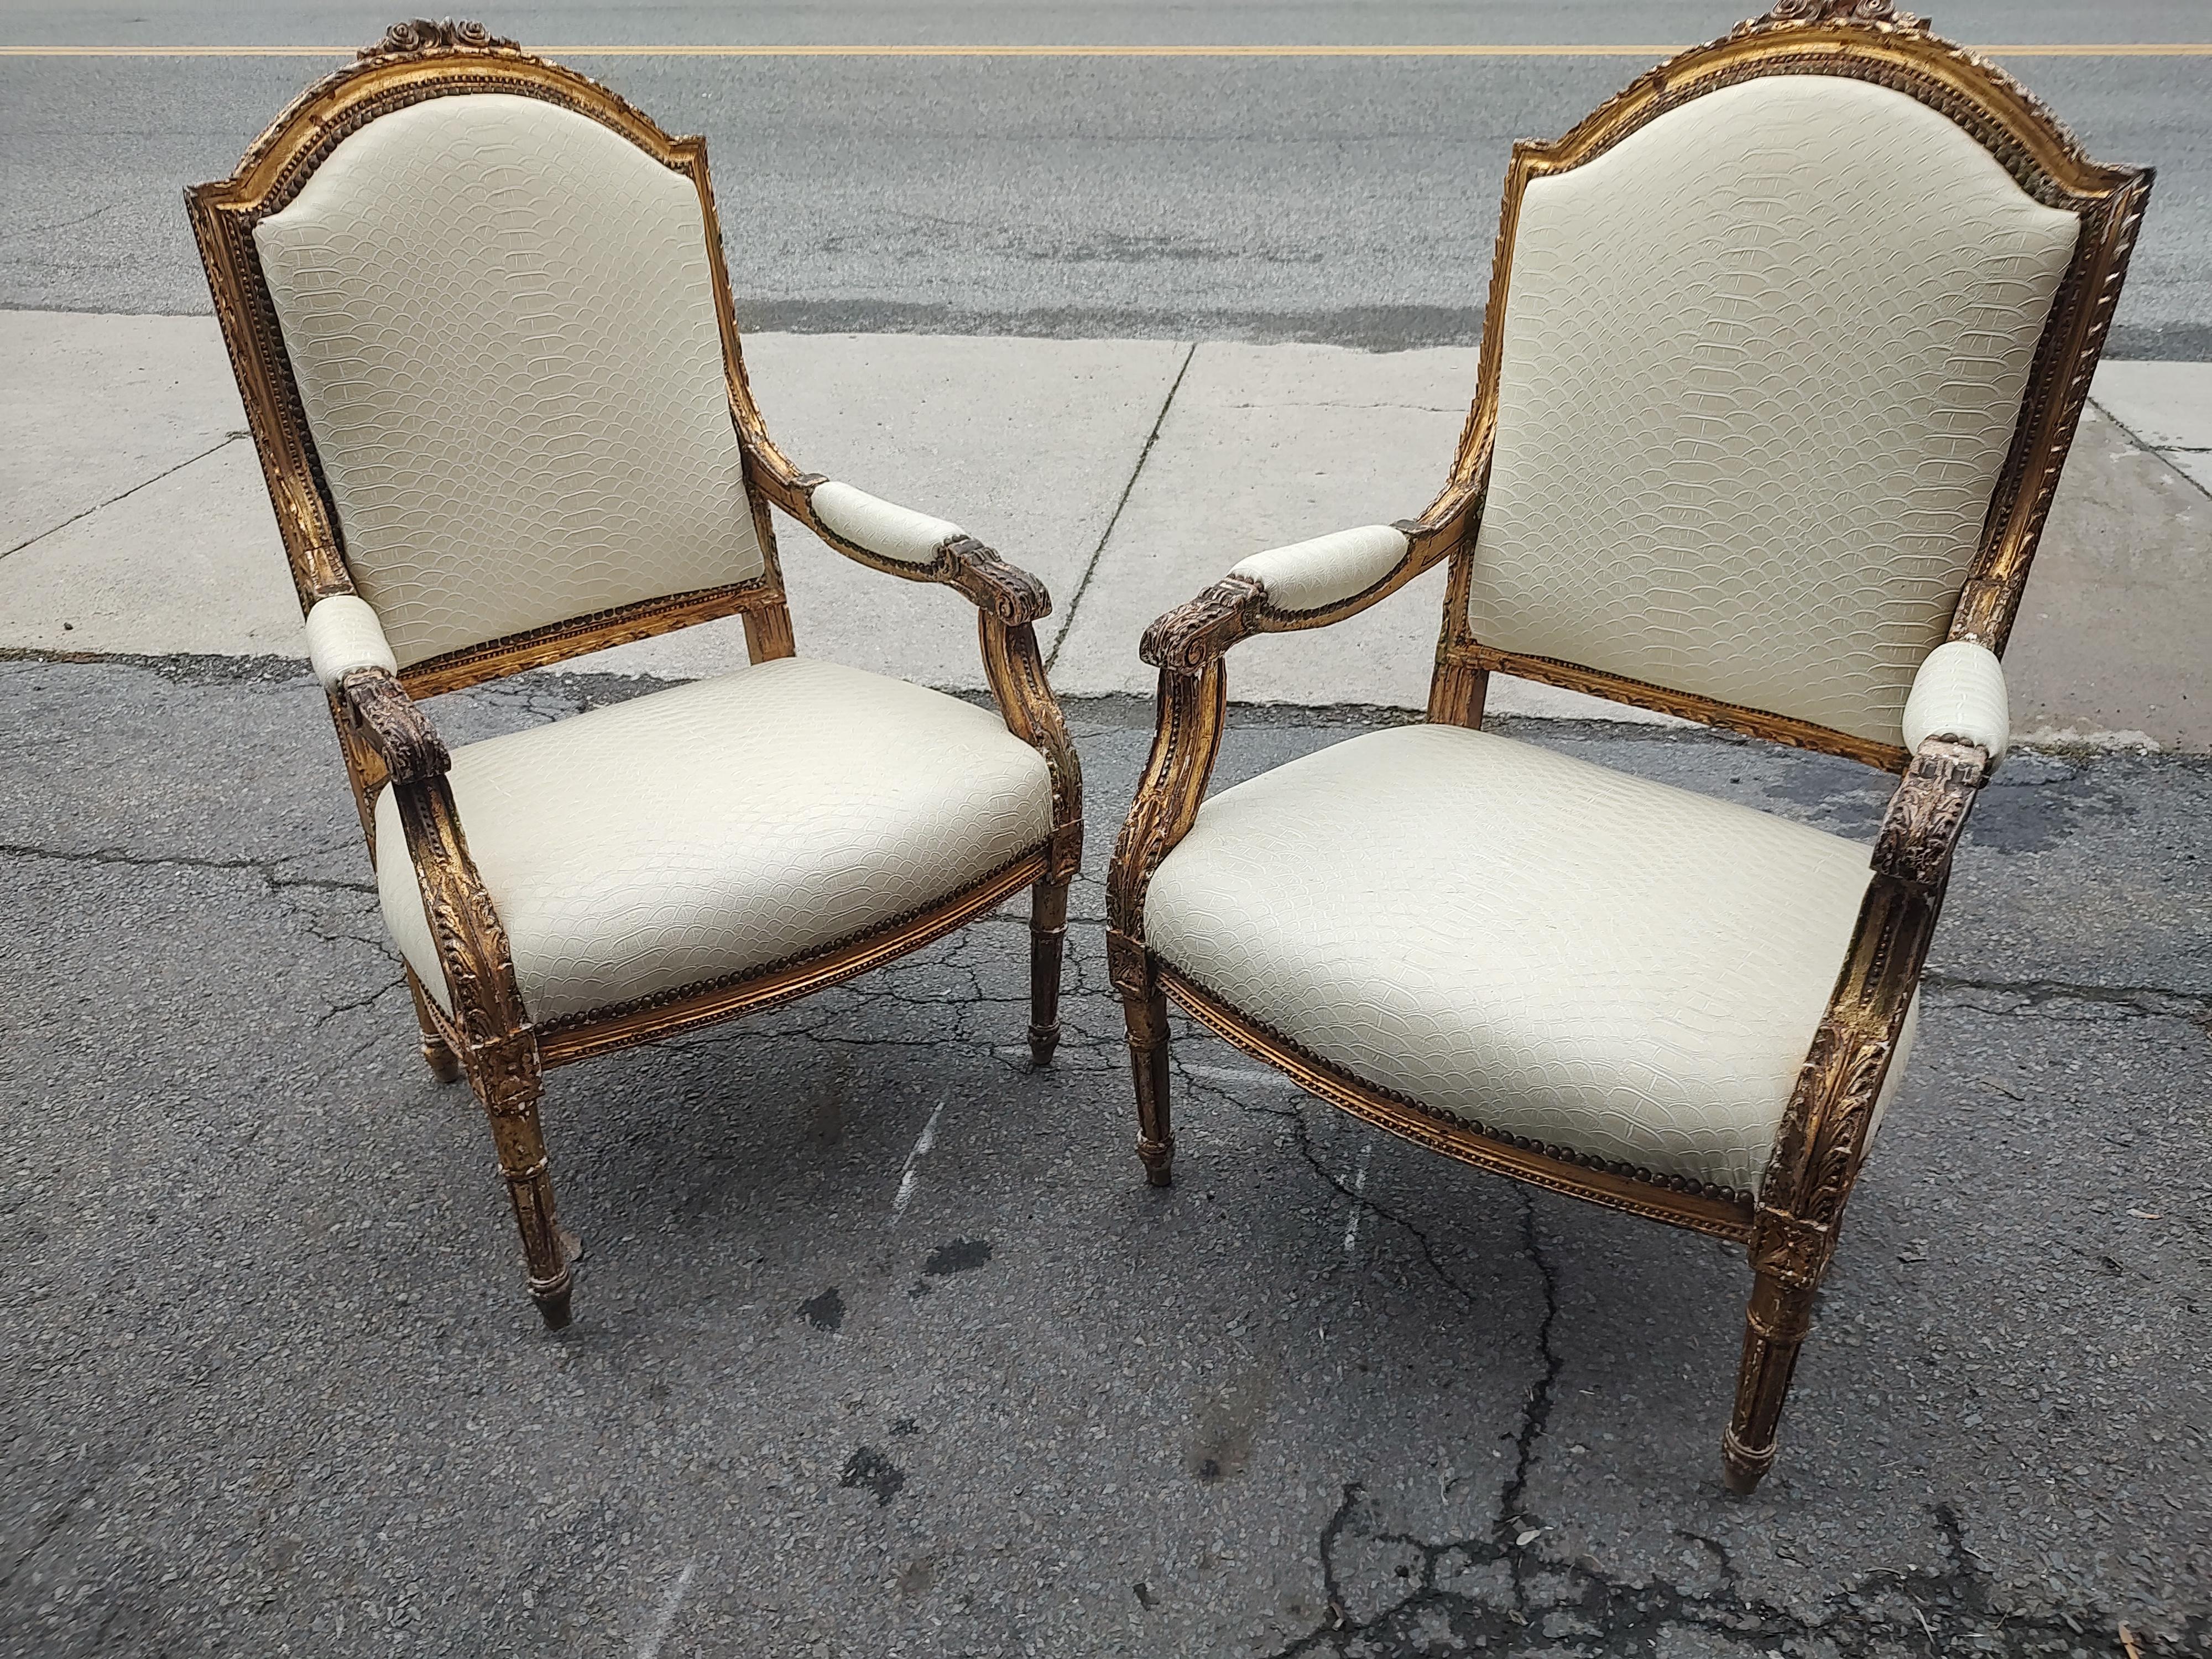 Fabulous pair of Mid 18th Century Gilt French Sculptural Armchairs in faux crocodile and cotton velvet. Hand carved, Gilt and in very good condition considering their age. Updated in a faux crocodile upholstery brings into the 21st century with cool